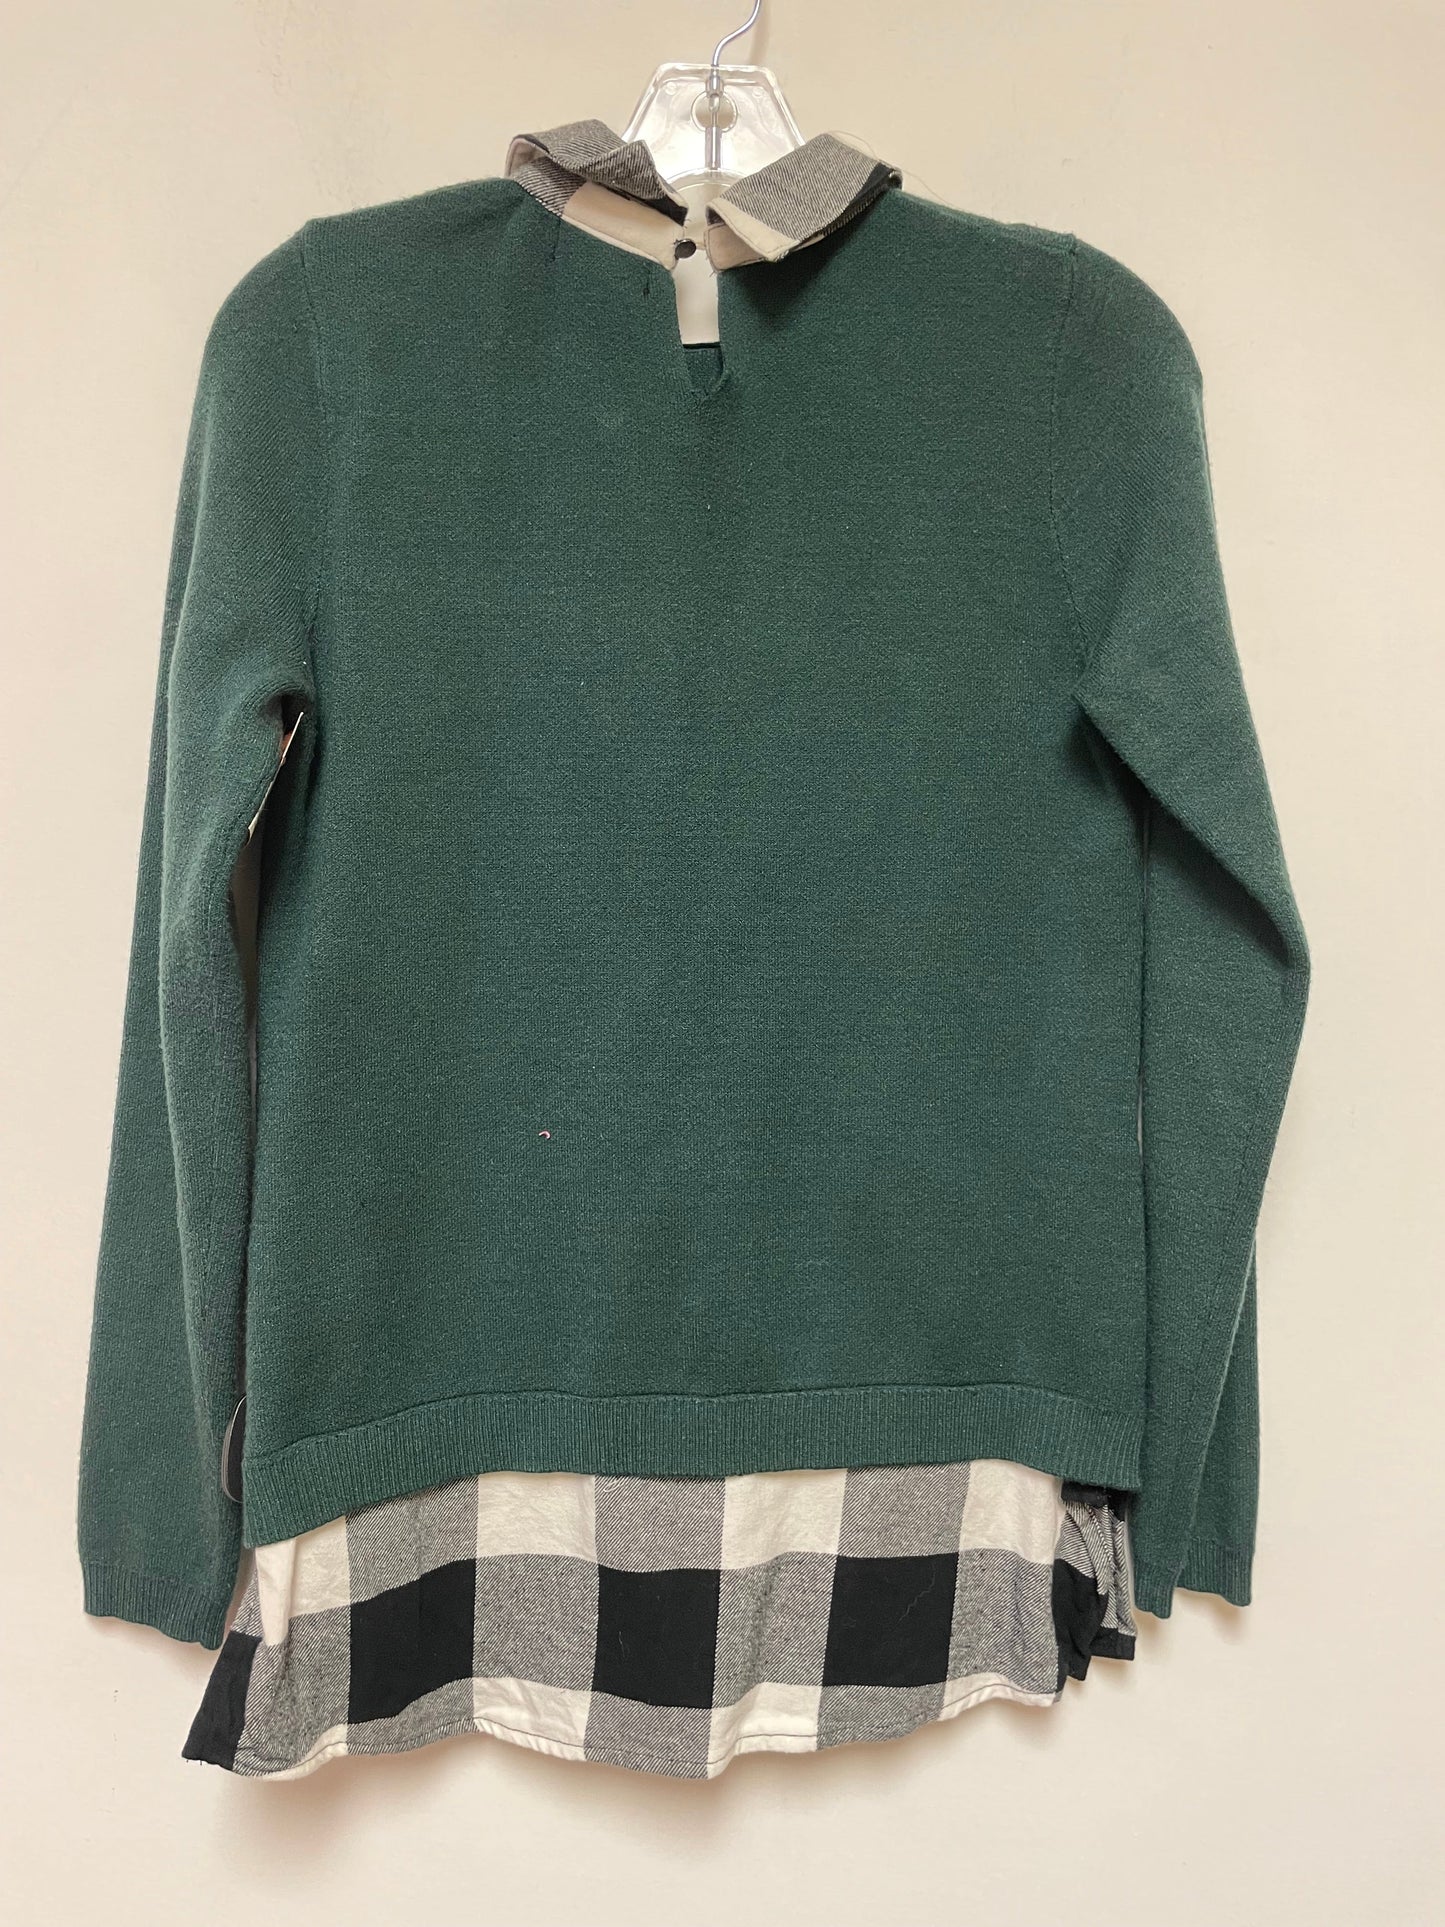 Sweater By Adrienne Vittadini  Size: S